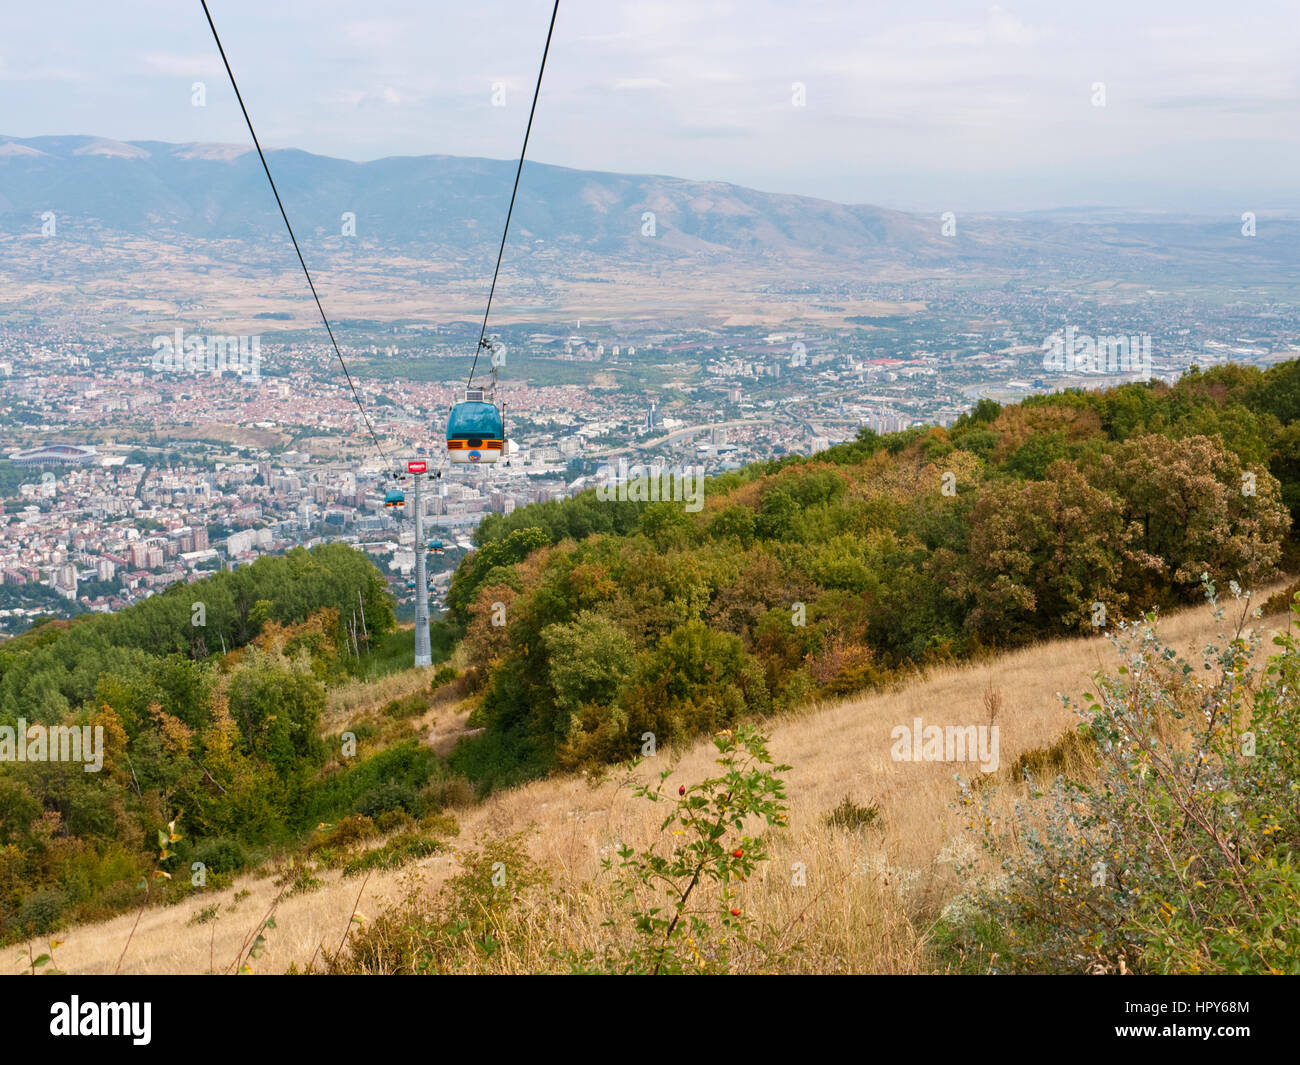 Spectacular panoramic views over Skopje, capital of Macedonia, from the cable car ascent of Mount Vodno (1066m) Stock Photo